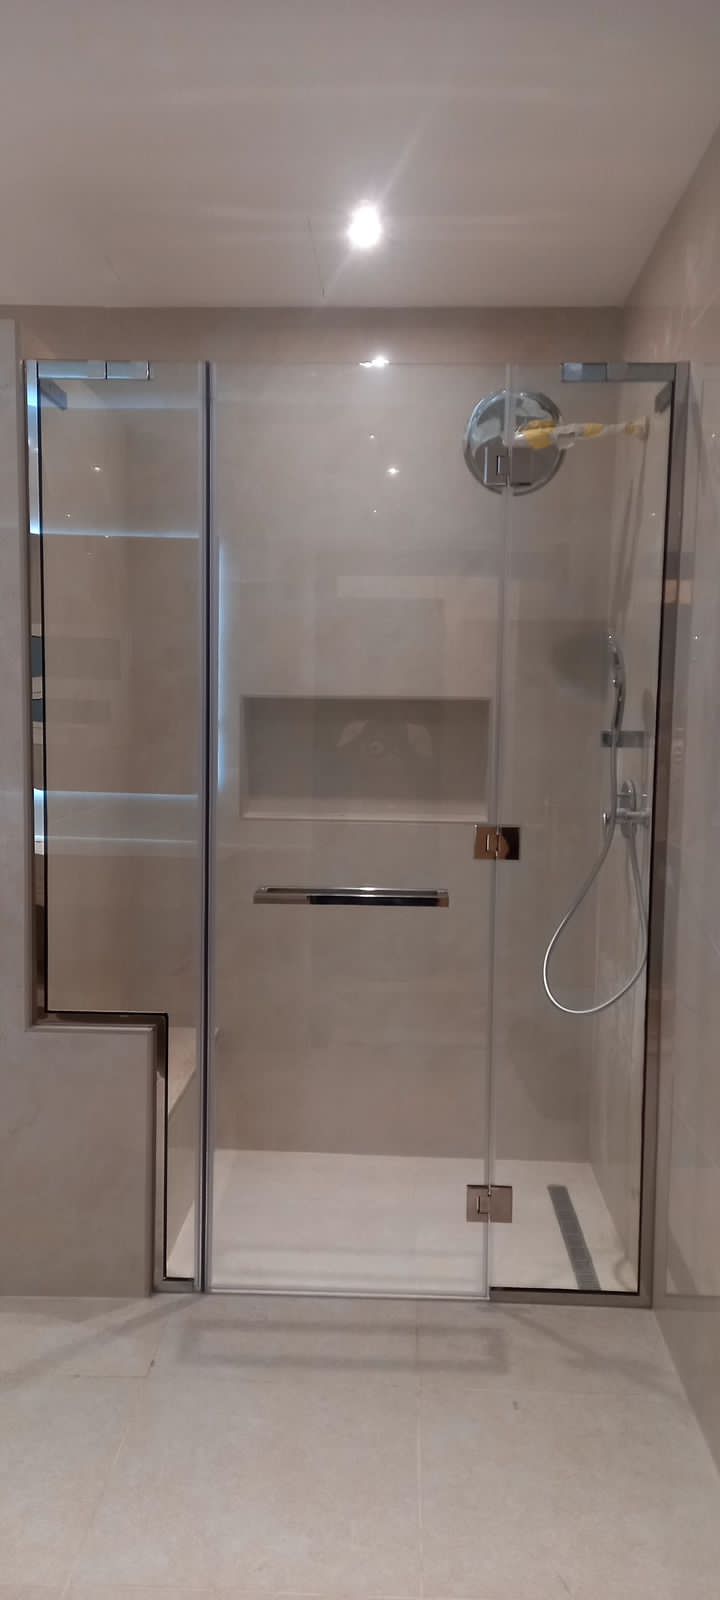 Bathroom Renovations Shower Glass Partitions & Mirrors